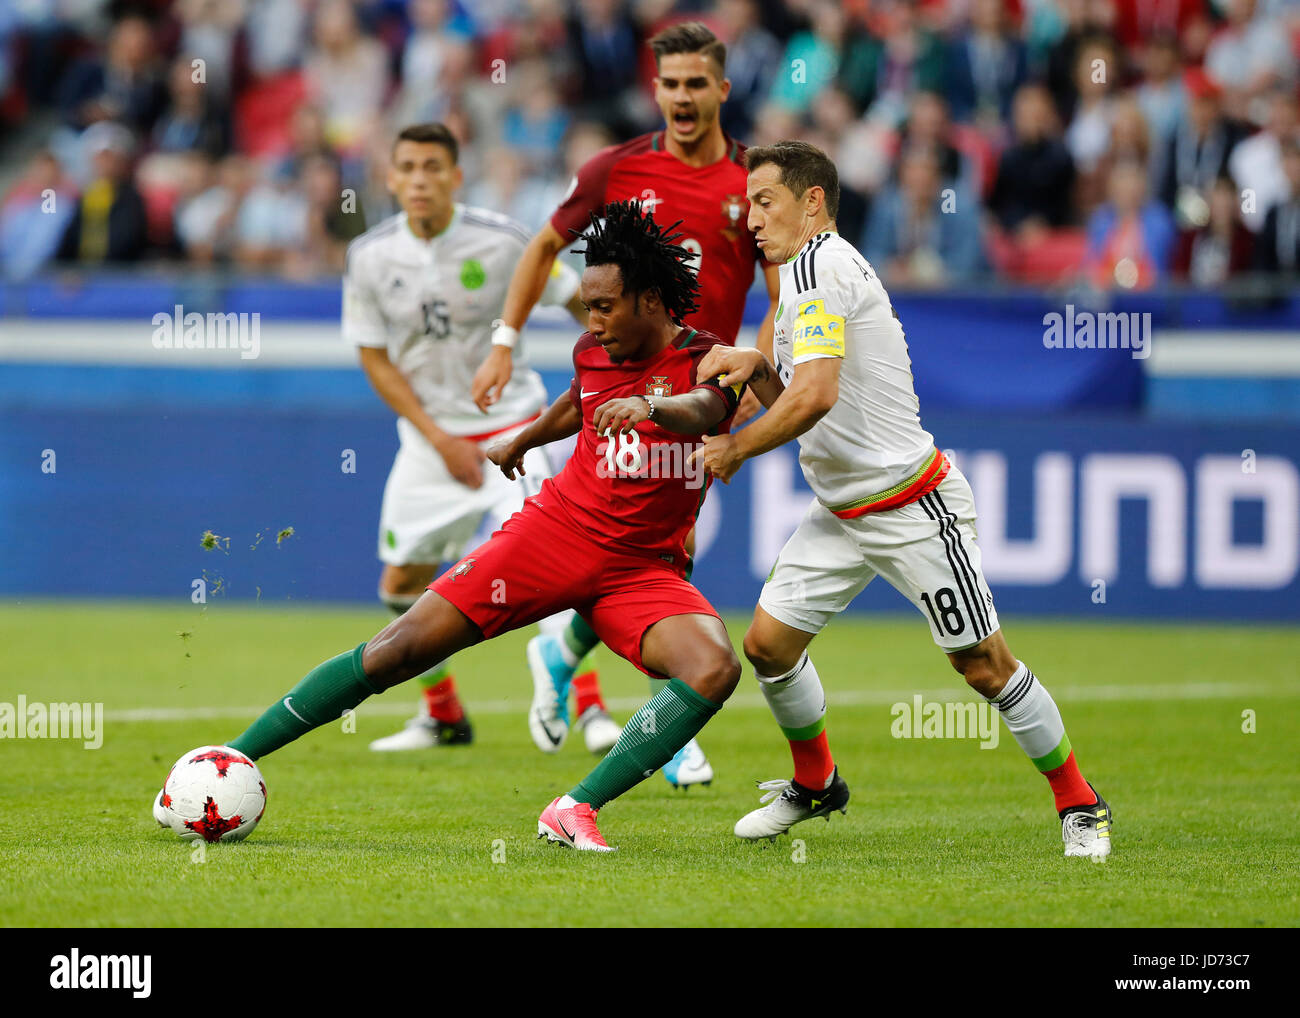 KAZAN, RT - 18.06.2017: PORTUGAL VS. MEXICO - GUARDADO Andres de México plays the ball with GELSON MARTINS of Portugal during a match between Portugal and Mexico valid for the first round of the Confederations Cup 2017 on Sunday (18) held at the Kazan Arena in Kazan, Russia. (Photo: Rodolfo Buhrer/La Imagem/Fotoarena) Stock Photo